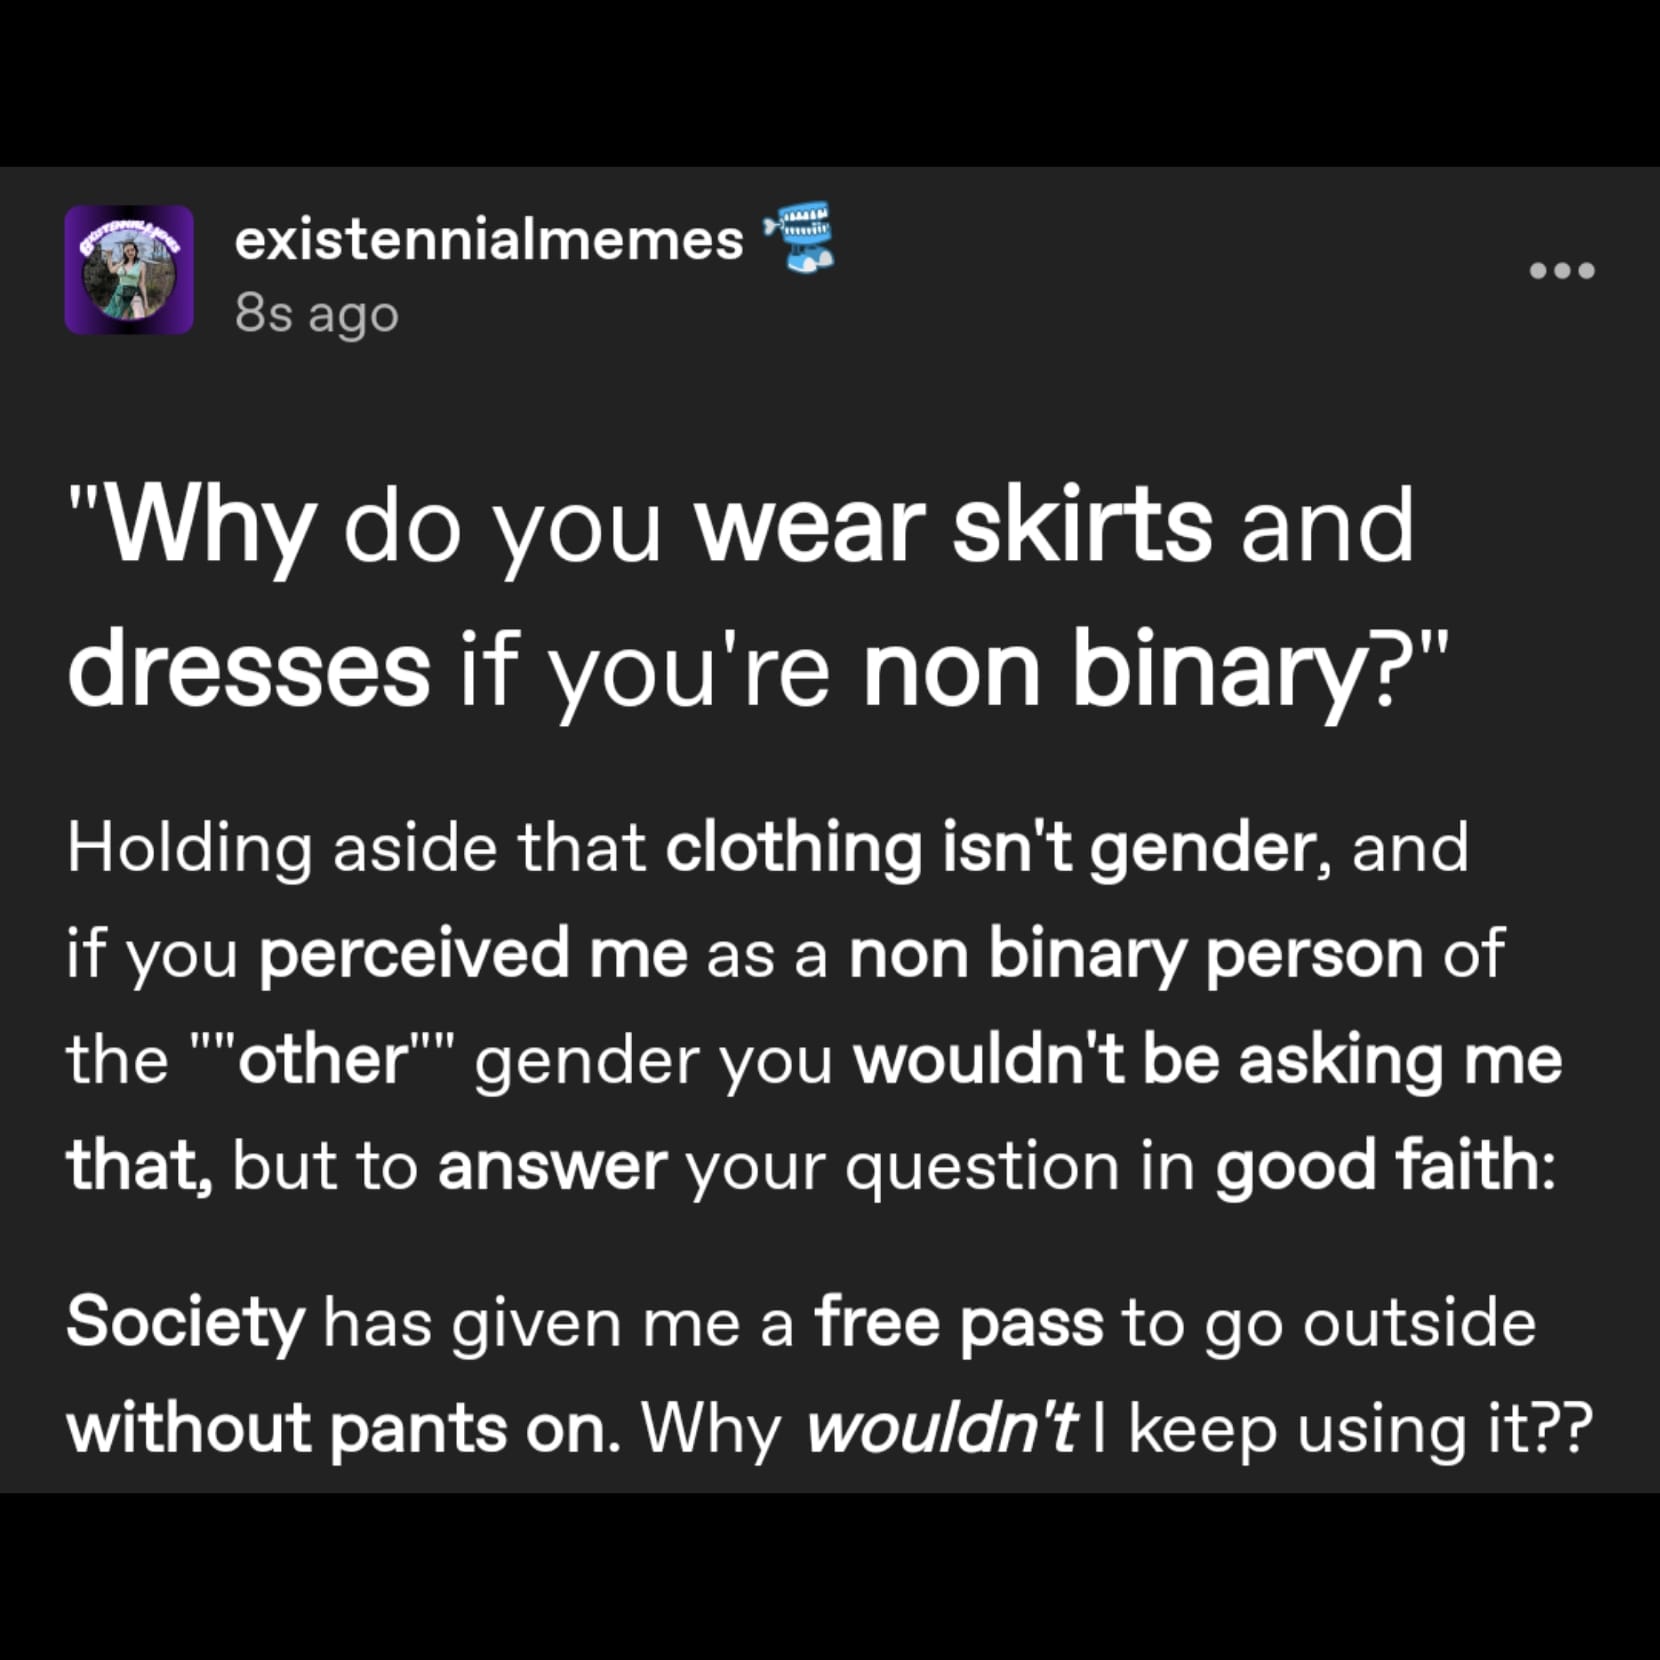 a tumblr post by user existennialmemes that reads: 'Why do you wear skirts and dresses if you're non binary?' 
Holding aside that clothing isn't gender, and if you perceived me as a non binary person of the 'other' gender you wouldn't be asking me that, but to answer your question in good faith: Society has given me a free pass to go outside without pants on. Why wouldn't I keep using it??